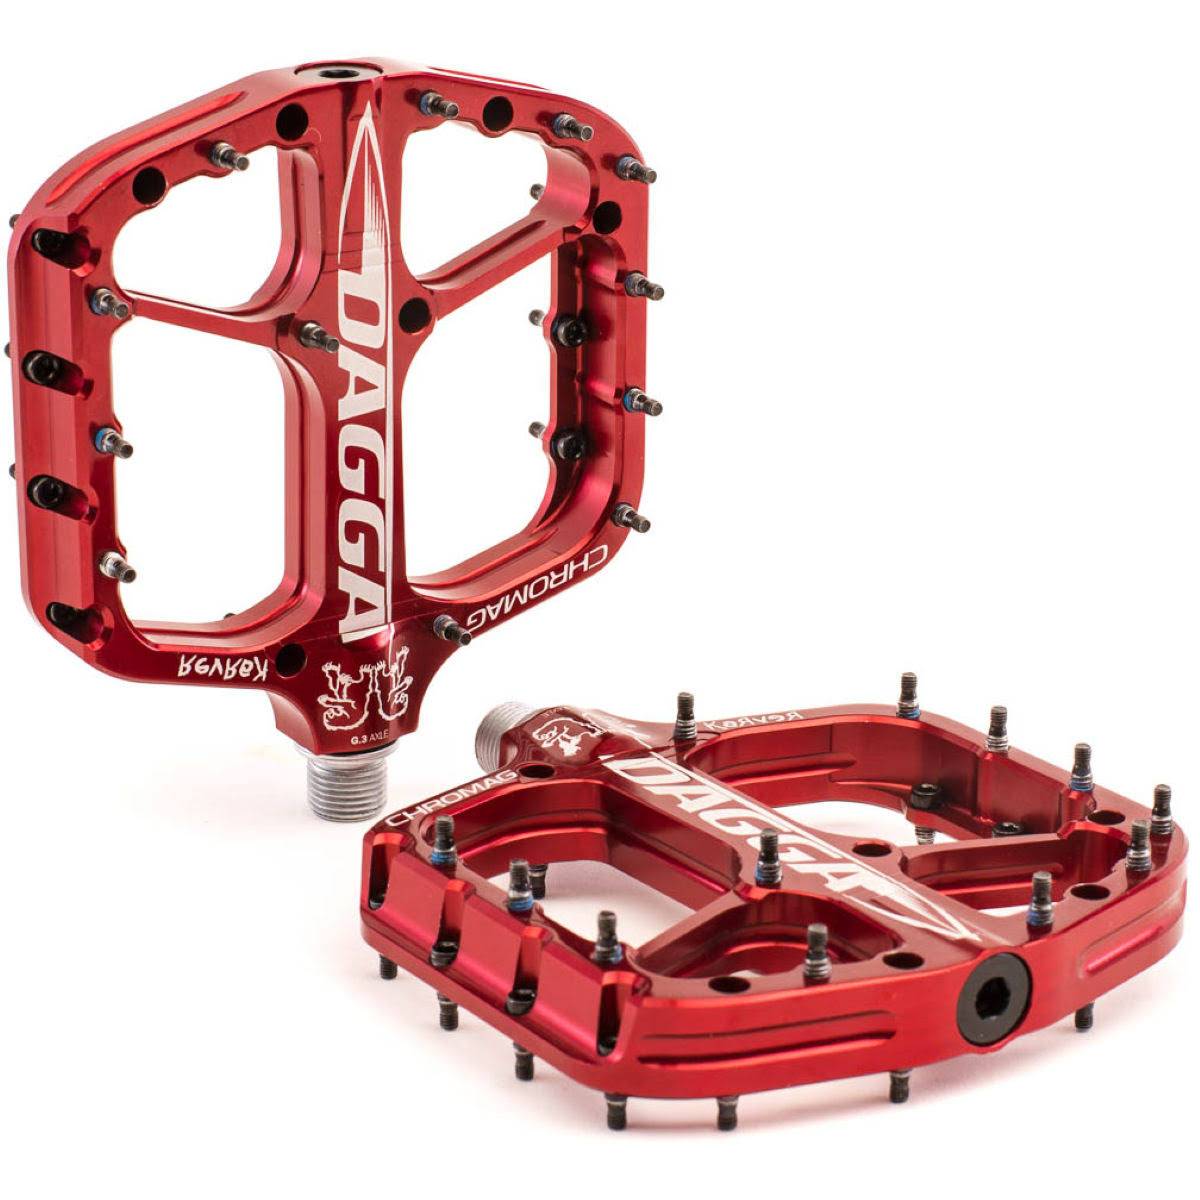 Chromag Dagga Pedal One Size Red Flat Pedals